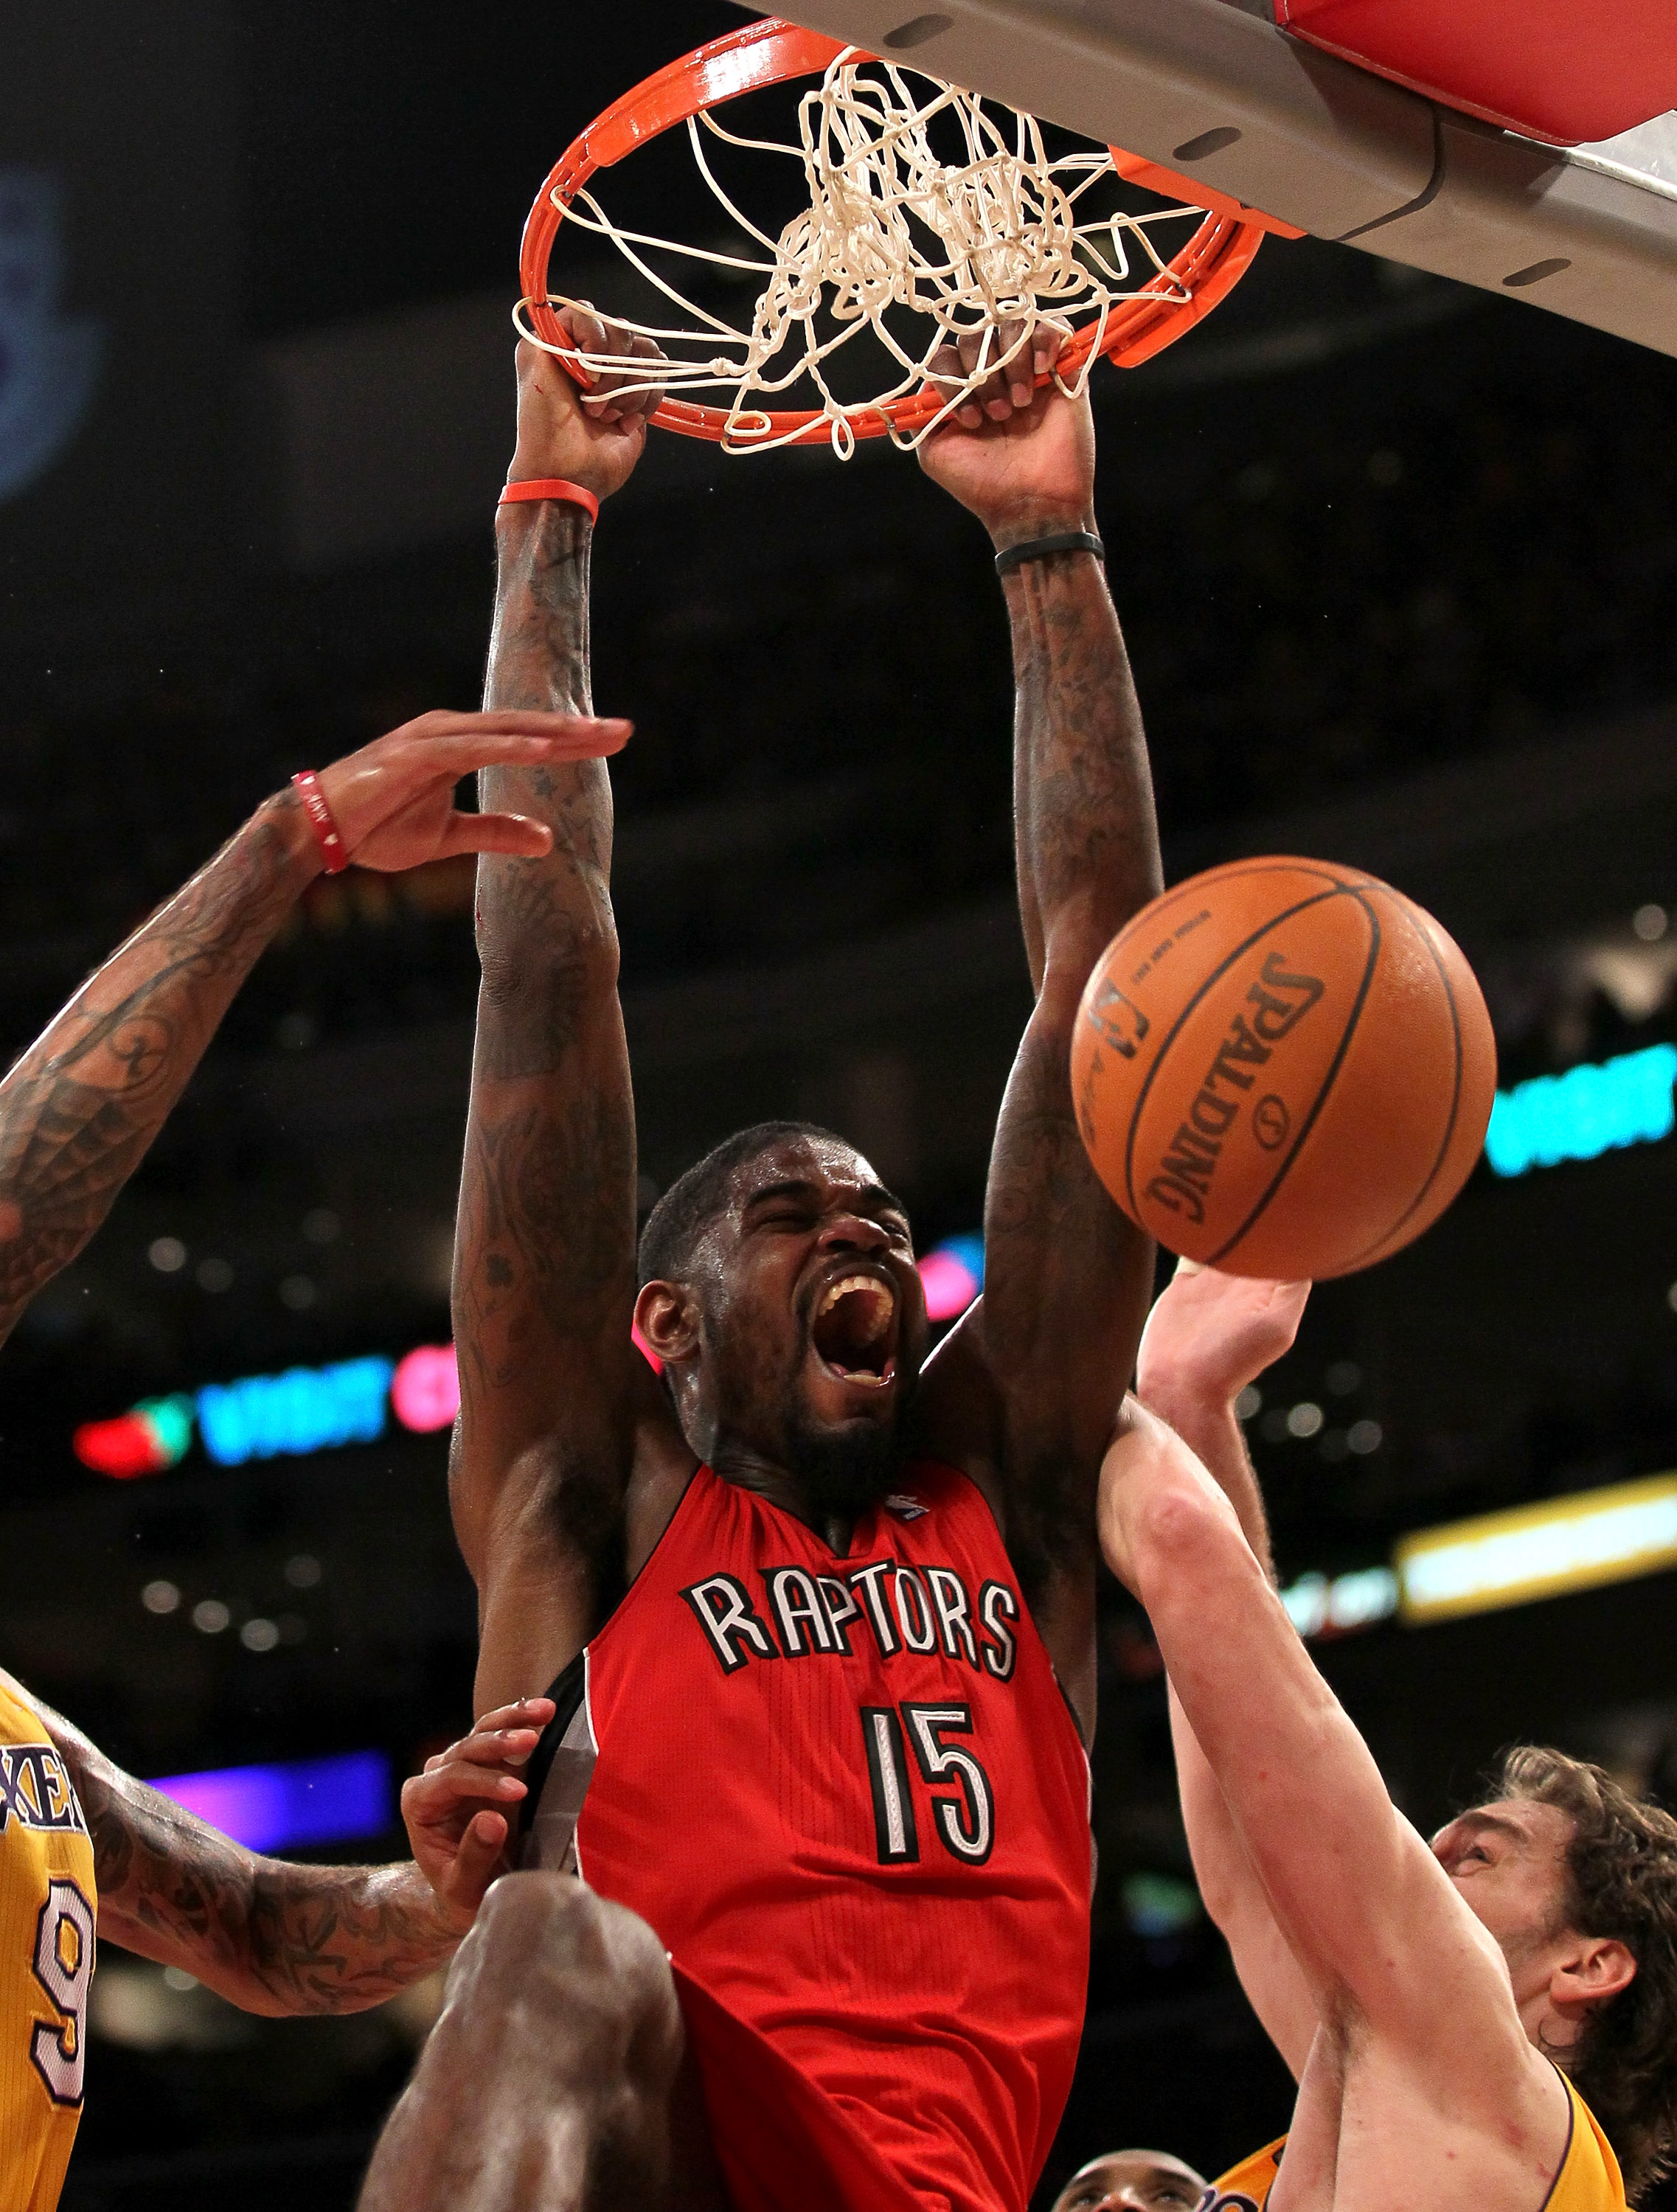 LOS ANGELES, CA - NOVEMBER 05:  Amir Johnson #15 of  the Toronto Raptors dunks against the Los Angeles Lakers at Staples Center on November 5, 2010 in Los Angeles, California.  The Lakers won 108-102.   NOTE TO USER: User expressly acknowledges and agrees